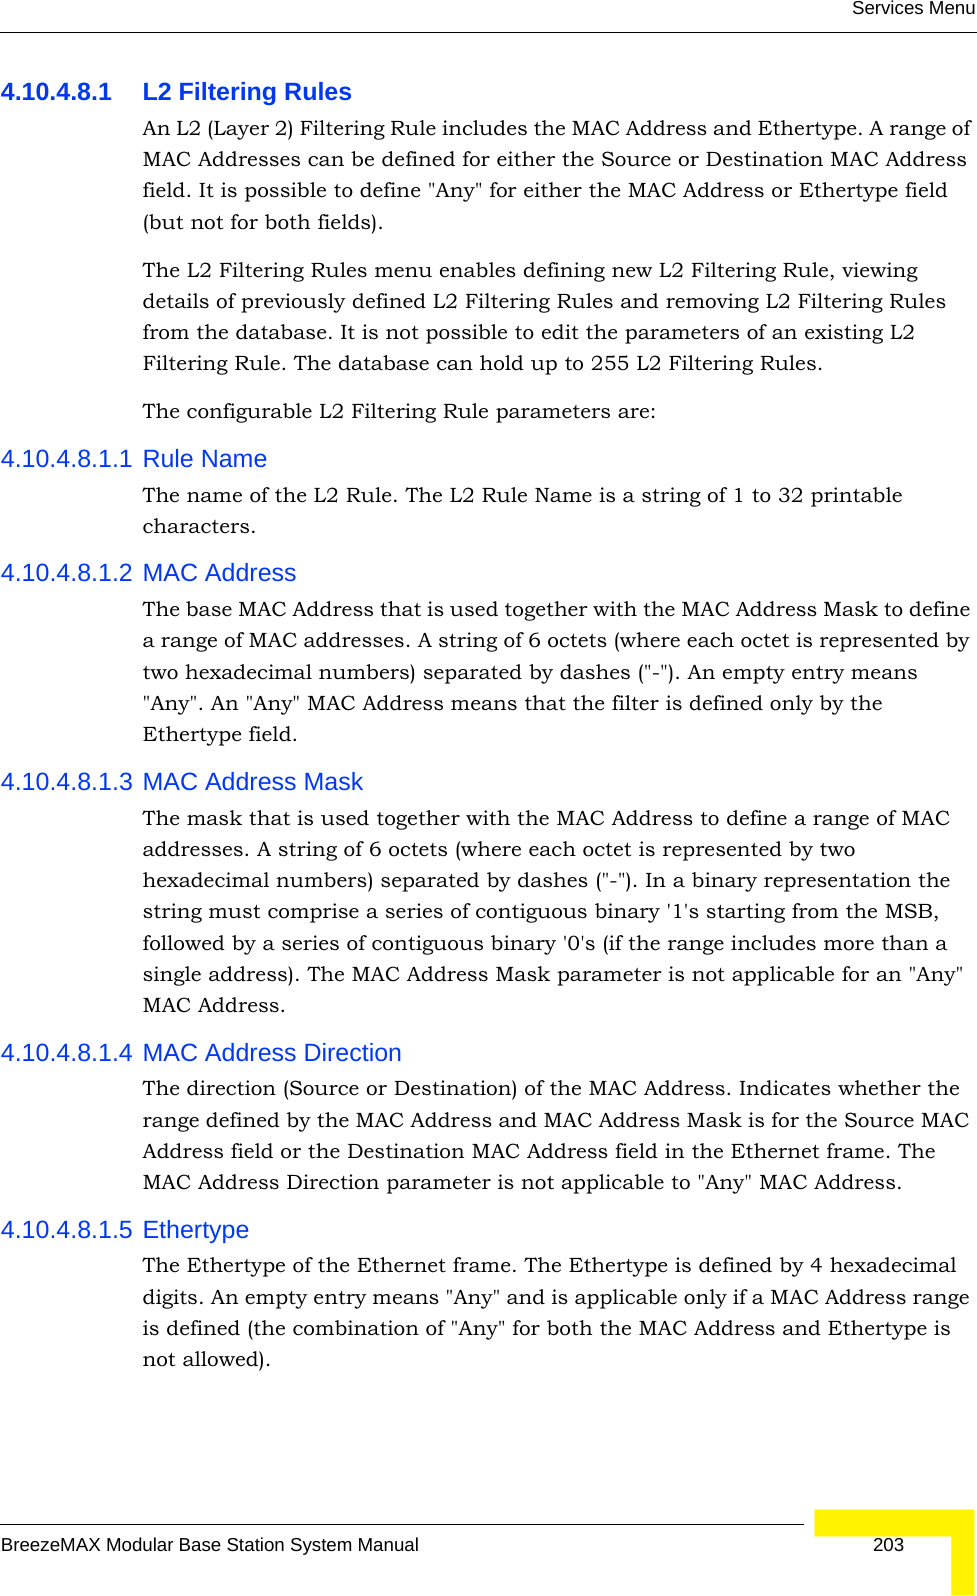 Services MenuBreezeMAX Modular Base Station System Manual 2034.10.4.8.1 L2 Filtering RulesAn L2 (Layer 2) Filtering Rule includes the MAC Address and Ethertype. A range of MAC Addresses can be defined for either the Source or Destination MAC Address field. It is possible to define &quot;Any&quot; for either the MAC Address or Ethertype field (but not for both fields). The L2 Filtering Rules menu enables defining new L2 Filtering Rule, viewing details of previously defined L2 Filtering Rules and removing L2 Filtering Rules from the database. It is not possible to edit the parameters of an existing L2 Filtering Rule. The database can hold up to 255 L2 Filtering Rules. The configurable L2 Filtering Rule parameters are:4.10.4.8.1.1 Rule NameThe name of the L2 Rule. The L2 Rule Name is a string of 1 to 32 printable characters.4.10.4.8.1.2 MAC AddressThe base MAC Address that is used together with the MAC Address Mask to define a range of MAC addresses. A string of 6 octets (where each octet is represented by two hexadecimal numbers) separated by dashes (&quot;-&quot;). An empty entry means &quot;Any&quot;. An &quot;Any&quot; MAC Address means that the filter is defined only by the Ethertype field.4.10.4.8.1.3 MAC Address MaskThe mask that is used together with the MAC Address to define a range of MAC addresses. A string of 6 octets (where each octet is represented by two hexadecimal numbers) separated by dashes (&quot;-&quot;). In a binary representation the string must comprise a series of contiguous binary &apos;1&apos;s starting from the MSB, followed by a series of contiguous binary &apos;0&apos;s (if the range includes more than a single address). The MAC Address Mask parameter is not applicable for an &quot;Any&quot; MAC Address.4.10.4.8.1.4 MAC Address DirectionThe direction (Source or Destination) of the MAC Address. Indicates whether the range defined by the MAC Address and MAC Address Mask is for the Source MAC Address field or the Destination MAC Address field in the Ethernet frame. The MAC Address Direction parameter is not applicable to &quot;Any&quot; MAC Address.4.10.4.8.1.5 EthertypeThe Ethertype of the Ethernet frame. The Ethertype is defined by 4 hexadecimal digits. An empty entry means &quot;Any&quot; and is applicable only if a MAC Address range is defined (the combination of &quot;Any&quot; for both the MAC Address and Ethertype is not allowed).